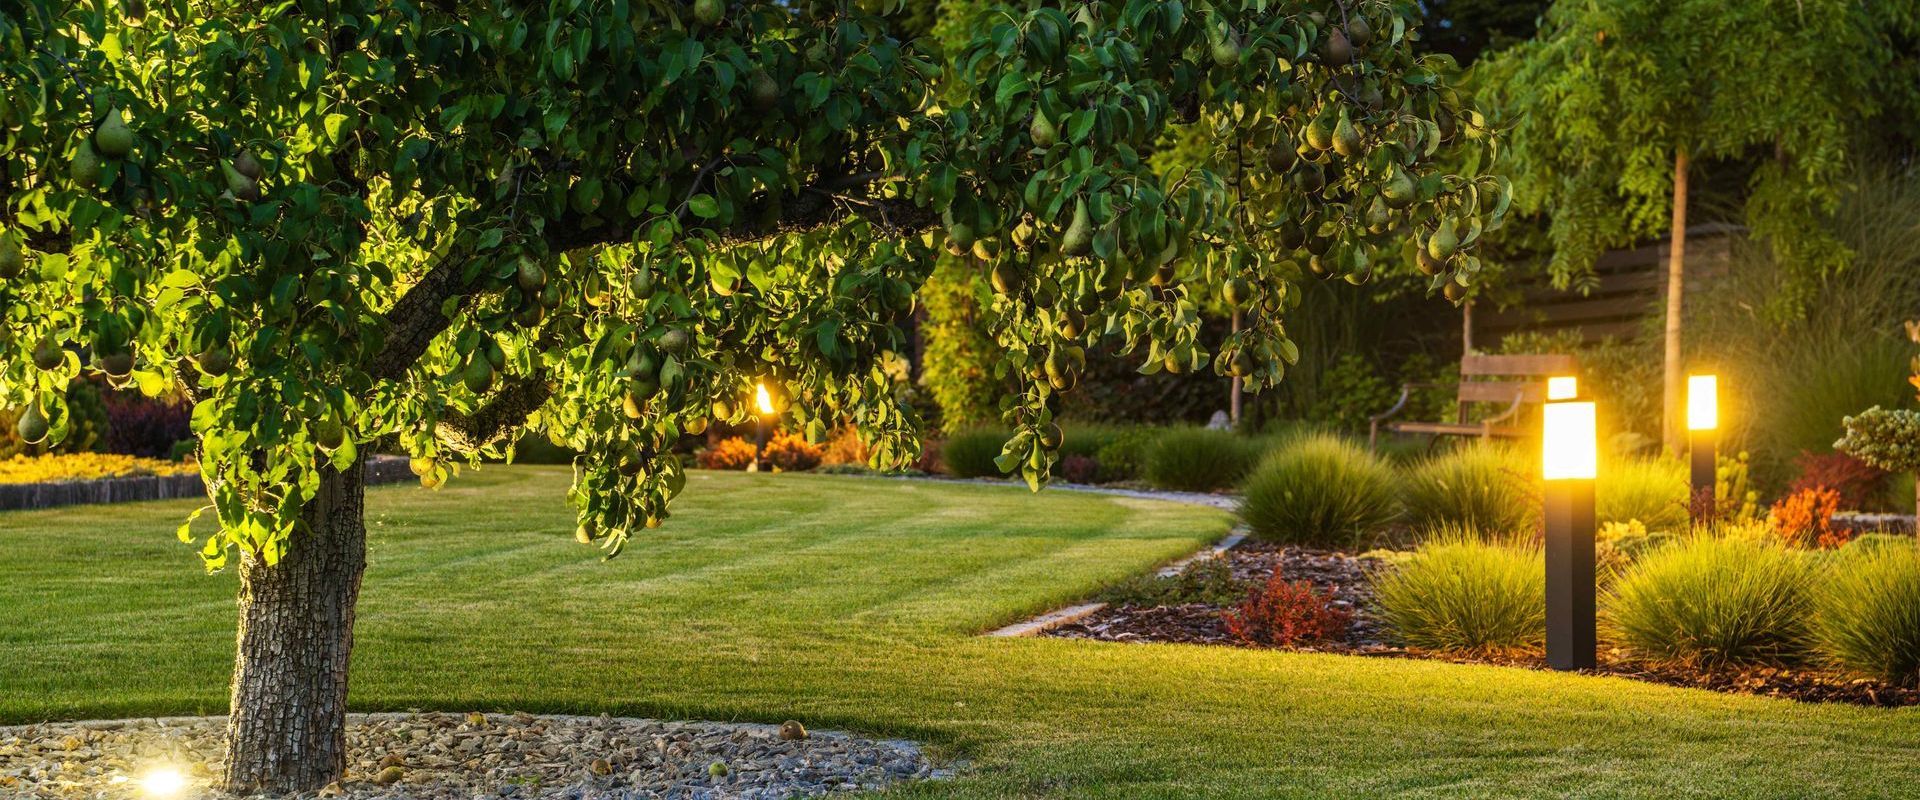 Beautiful Landscape With Lighting For Trees And Garden